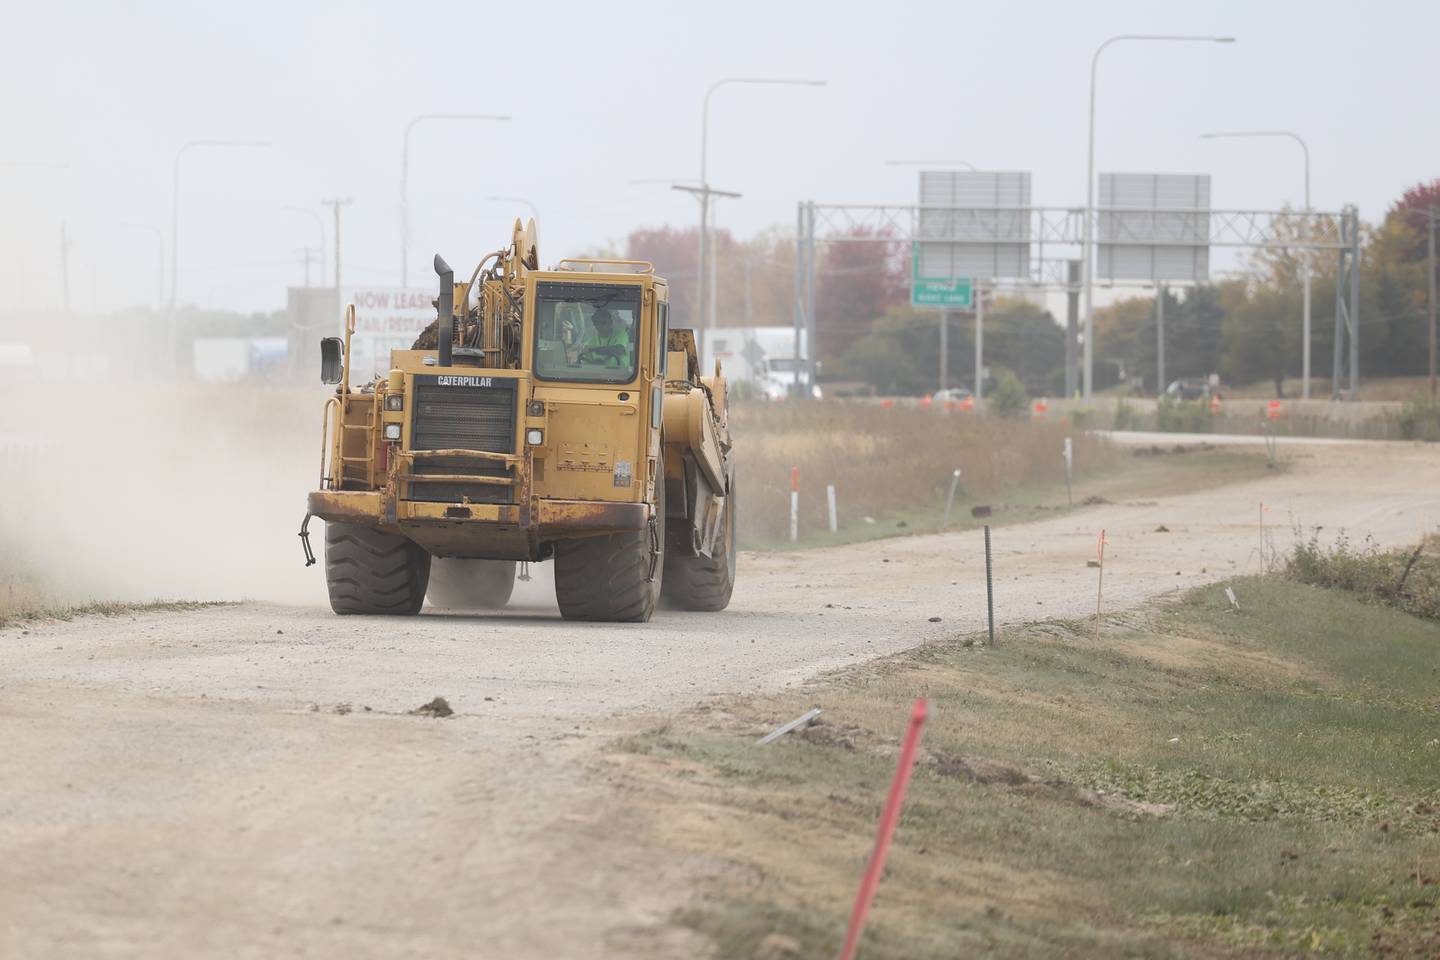 A construction truck drives along SE I-55 Frontage Road as groundwork continues on the Rock Run Crossings Development near the I-55 and I-80 interchange in Joliet on Tuesday, October 11th.